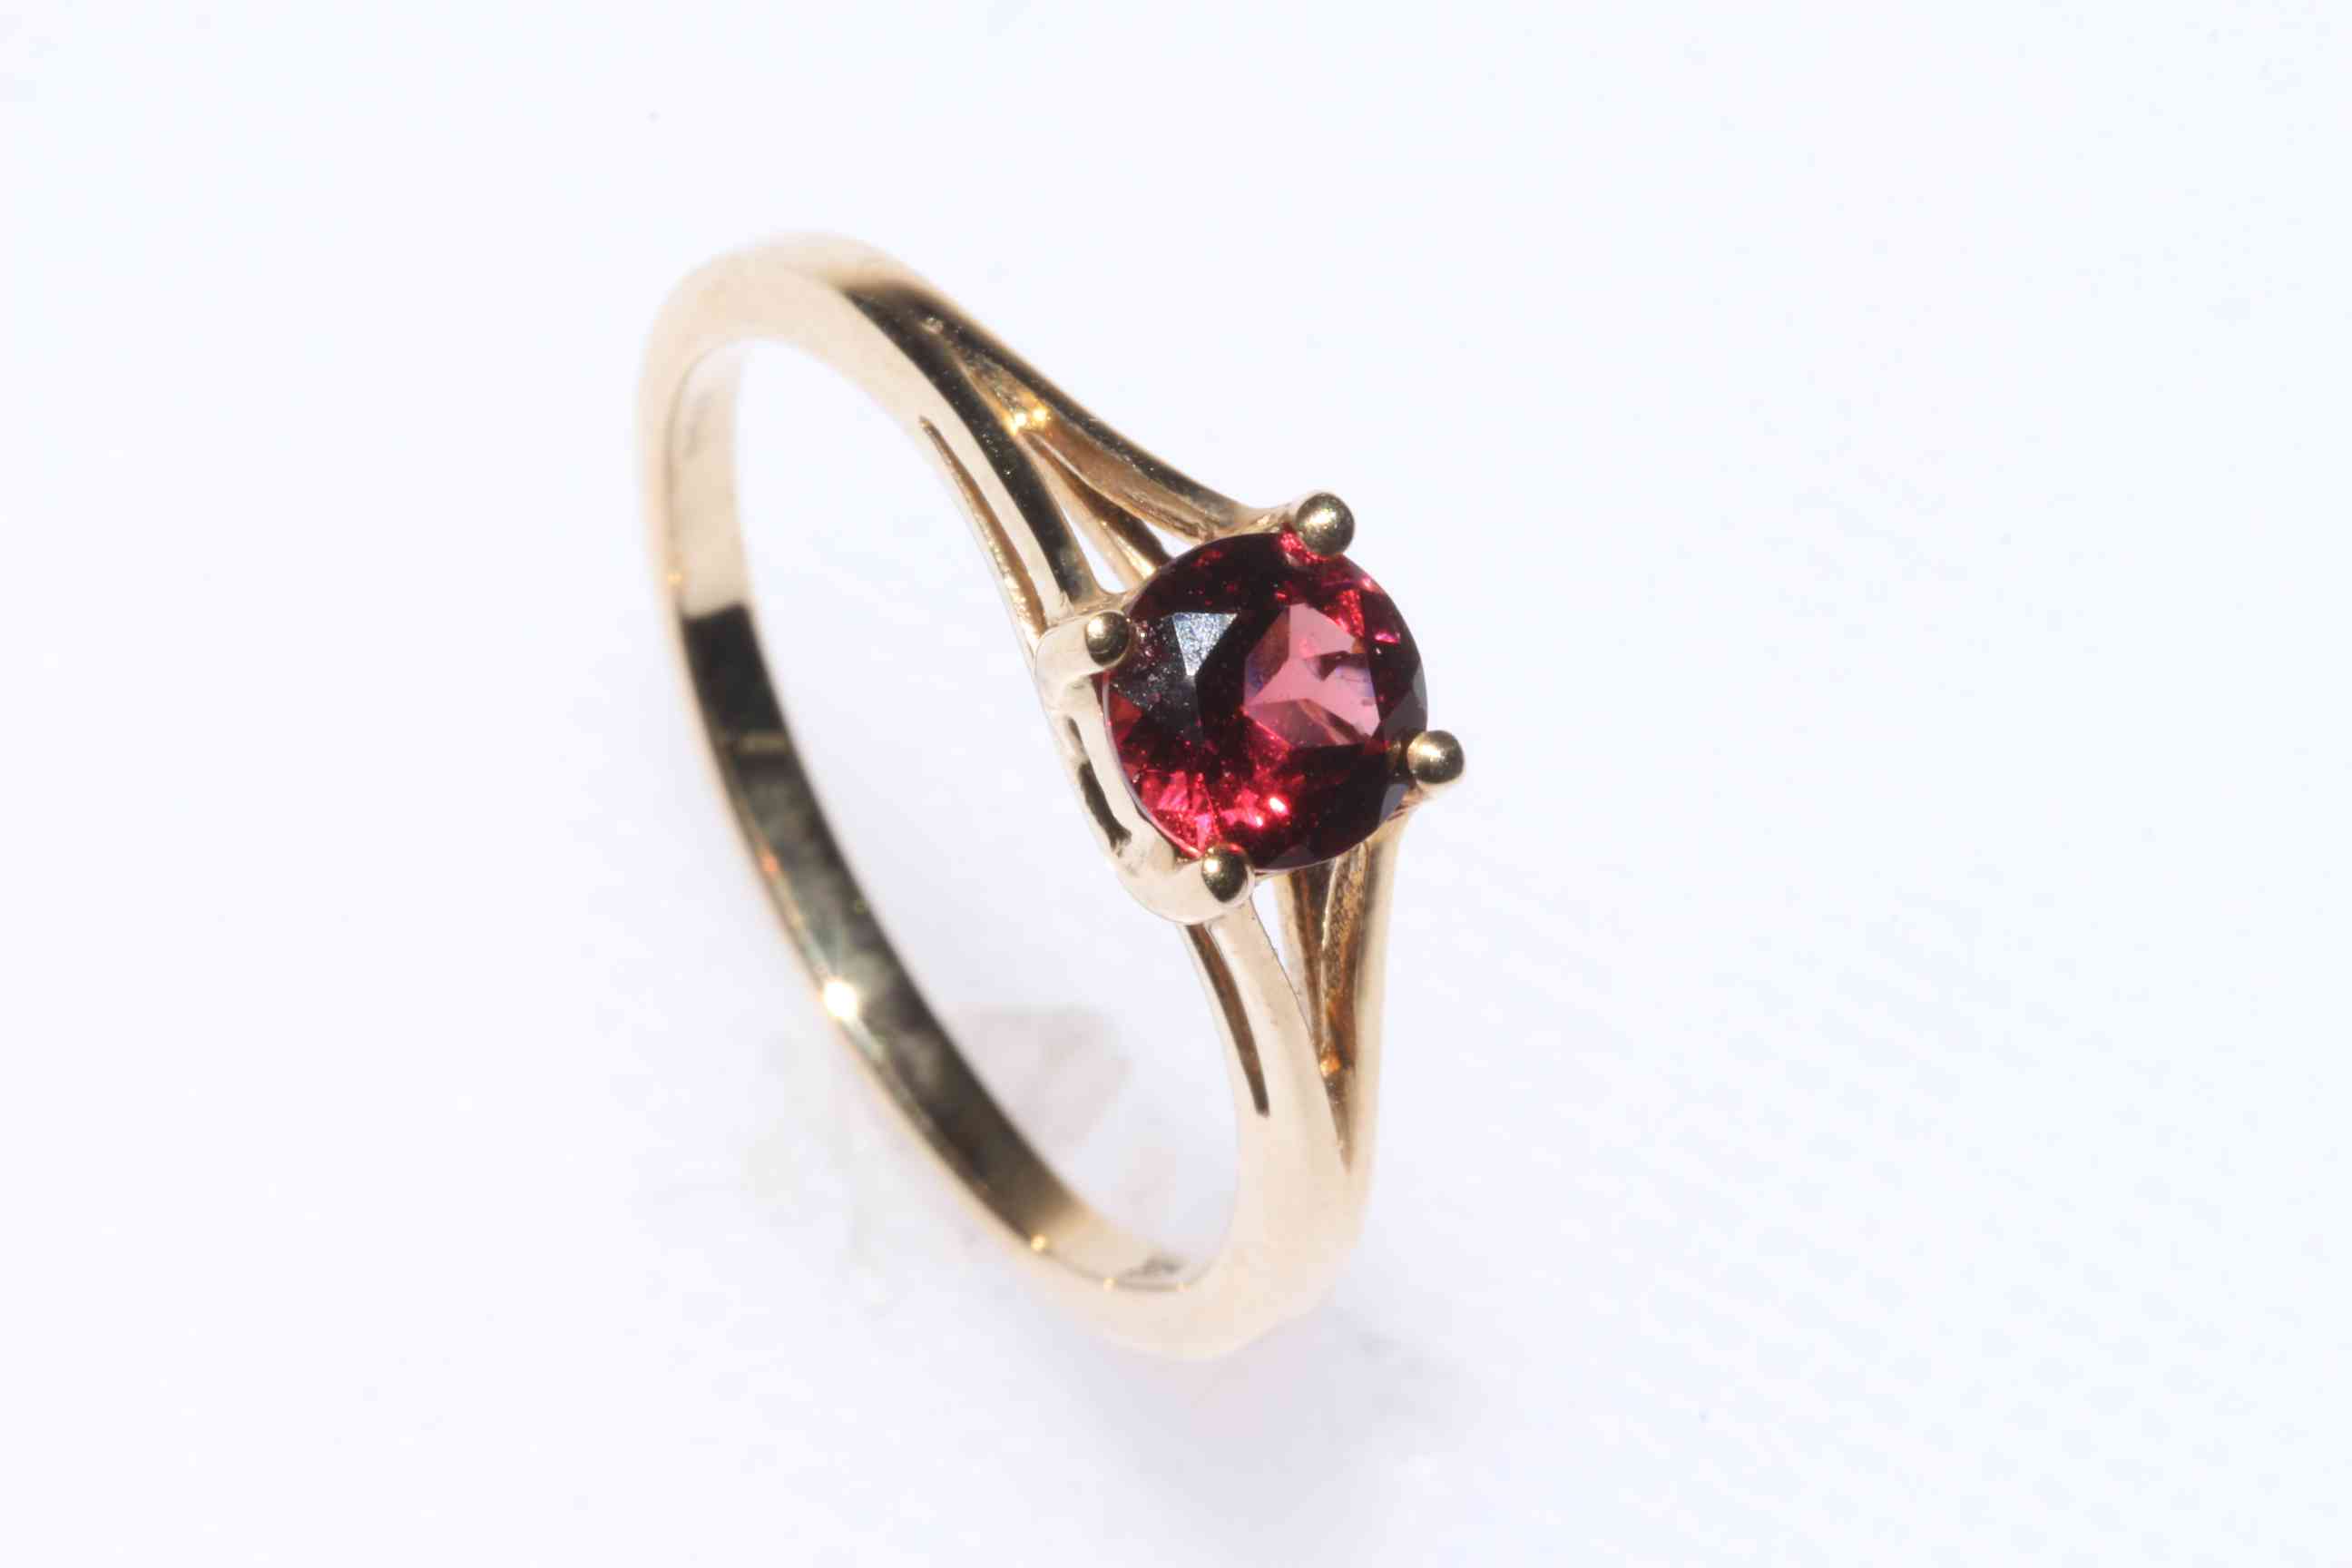 9k gold and garnet ring, size N/O, with certificate.